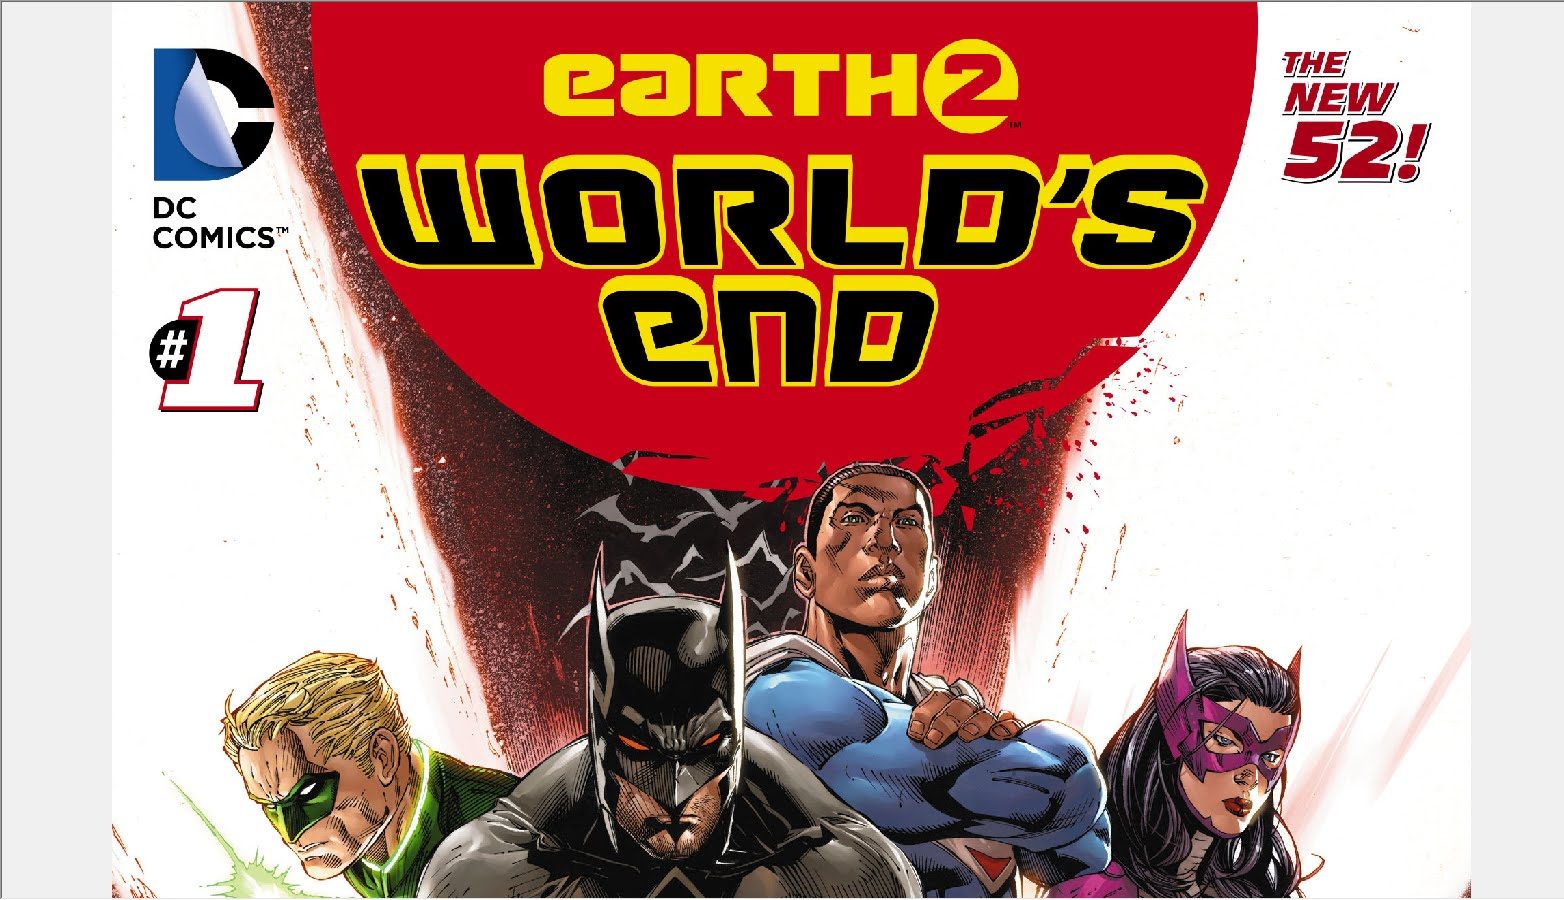 Earth 2 Worlds End Volume 1 Graphic Novel Review by Deffinition as part of New 52 readthrough